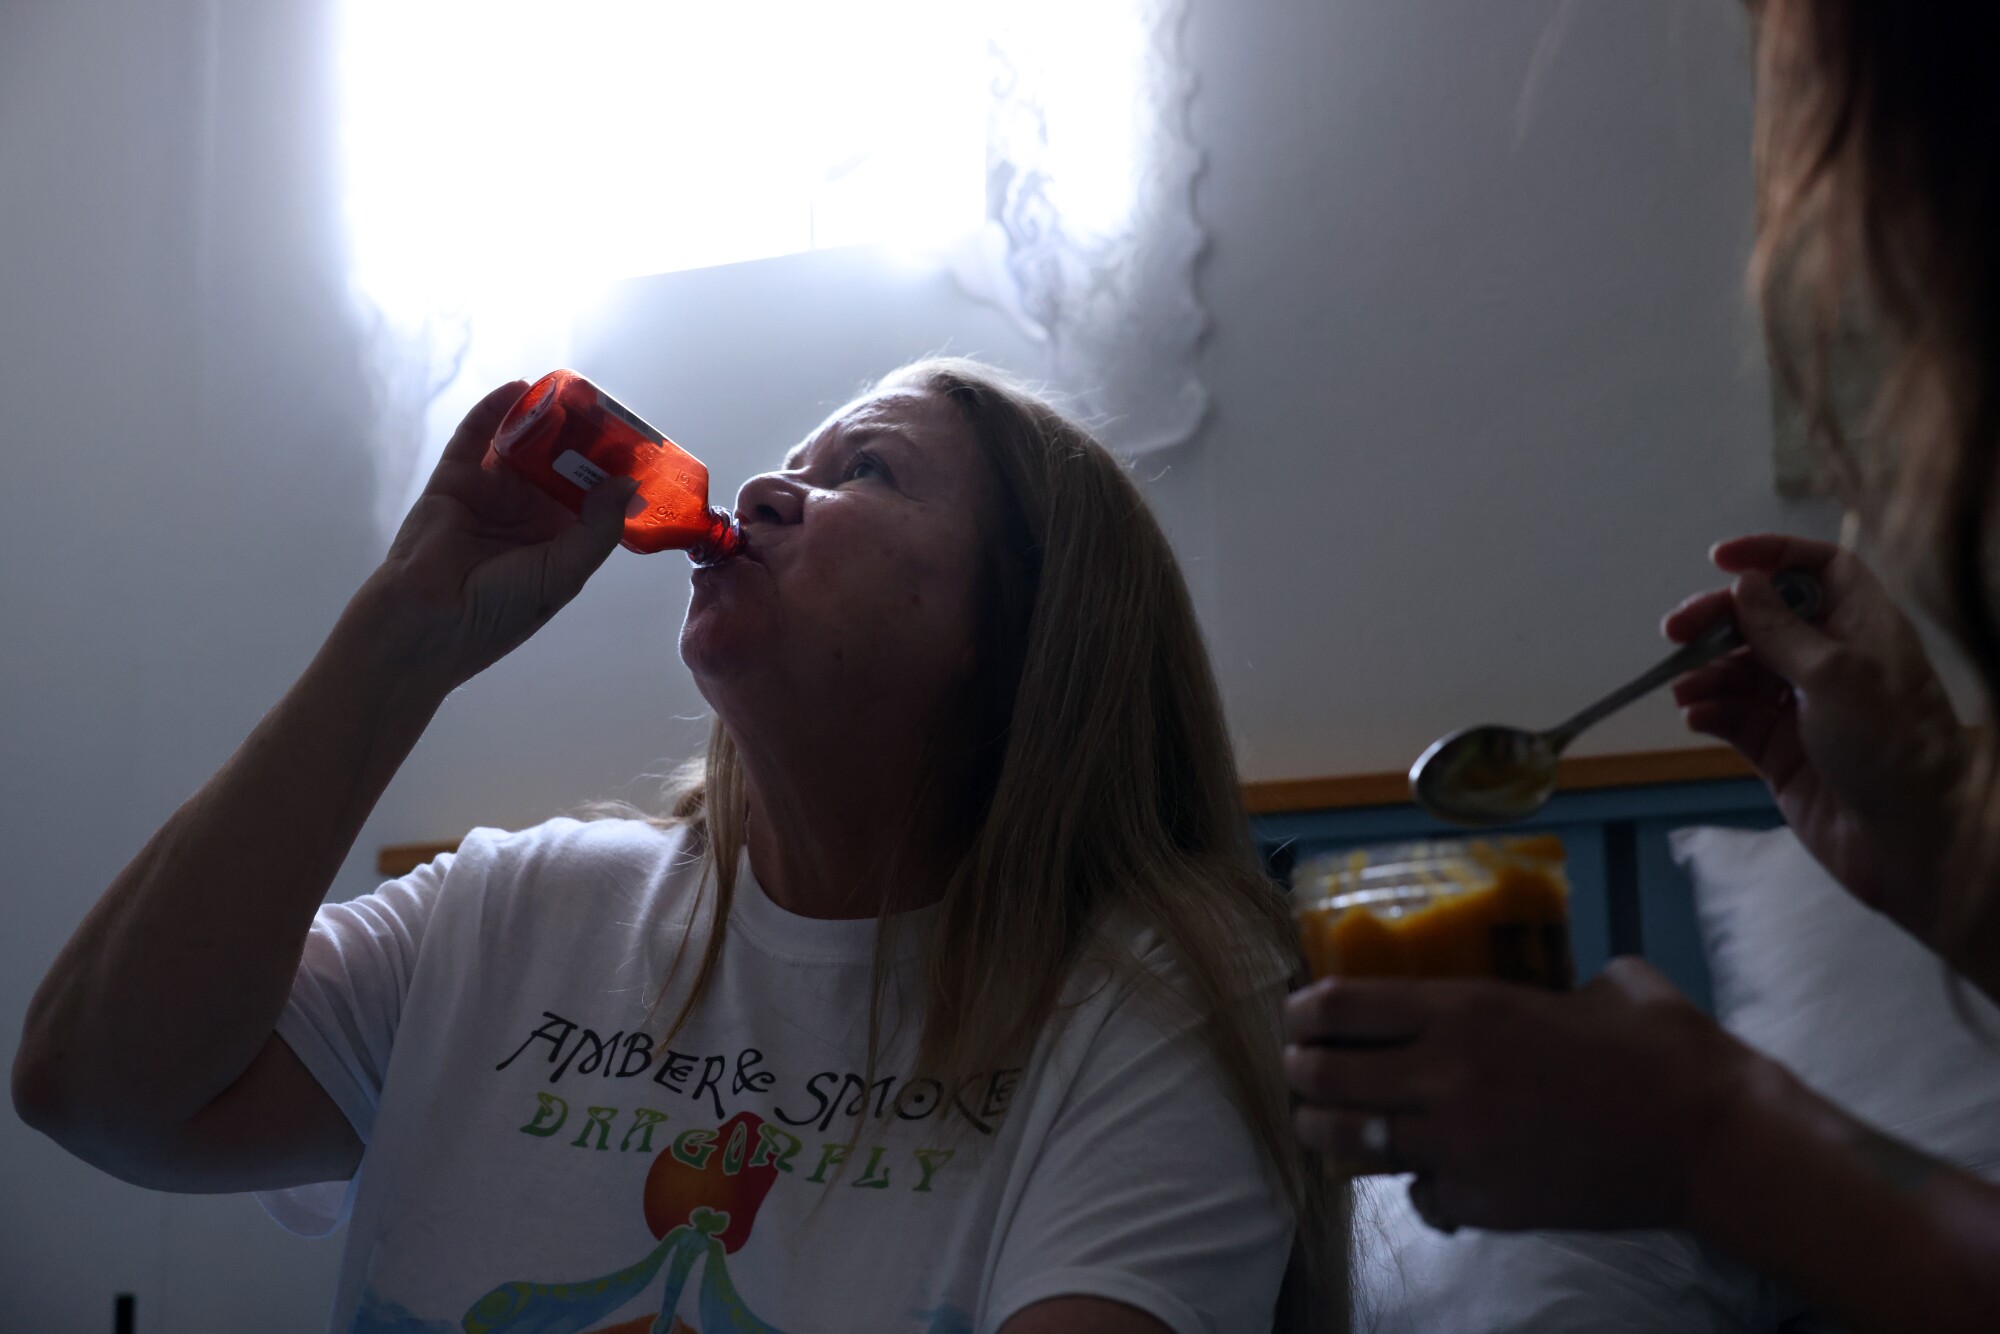 A woman drinks from a medication bottle